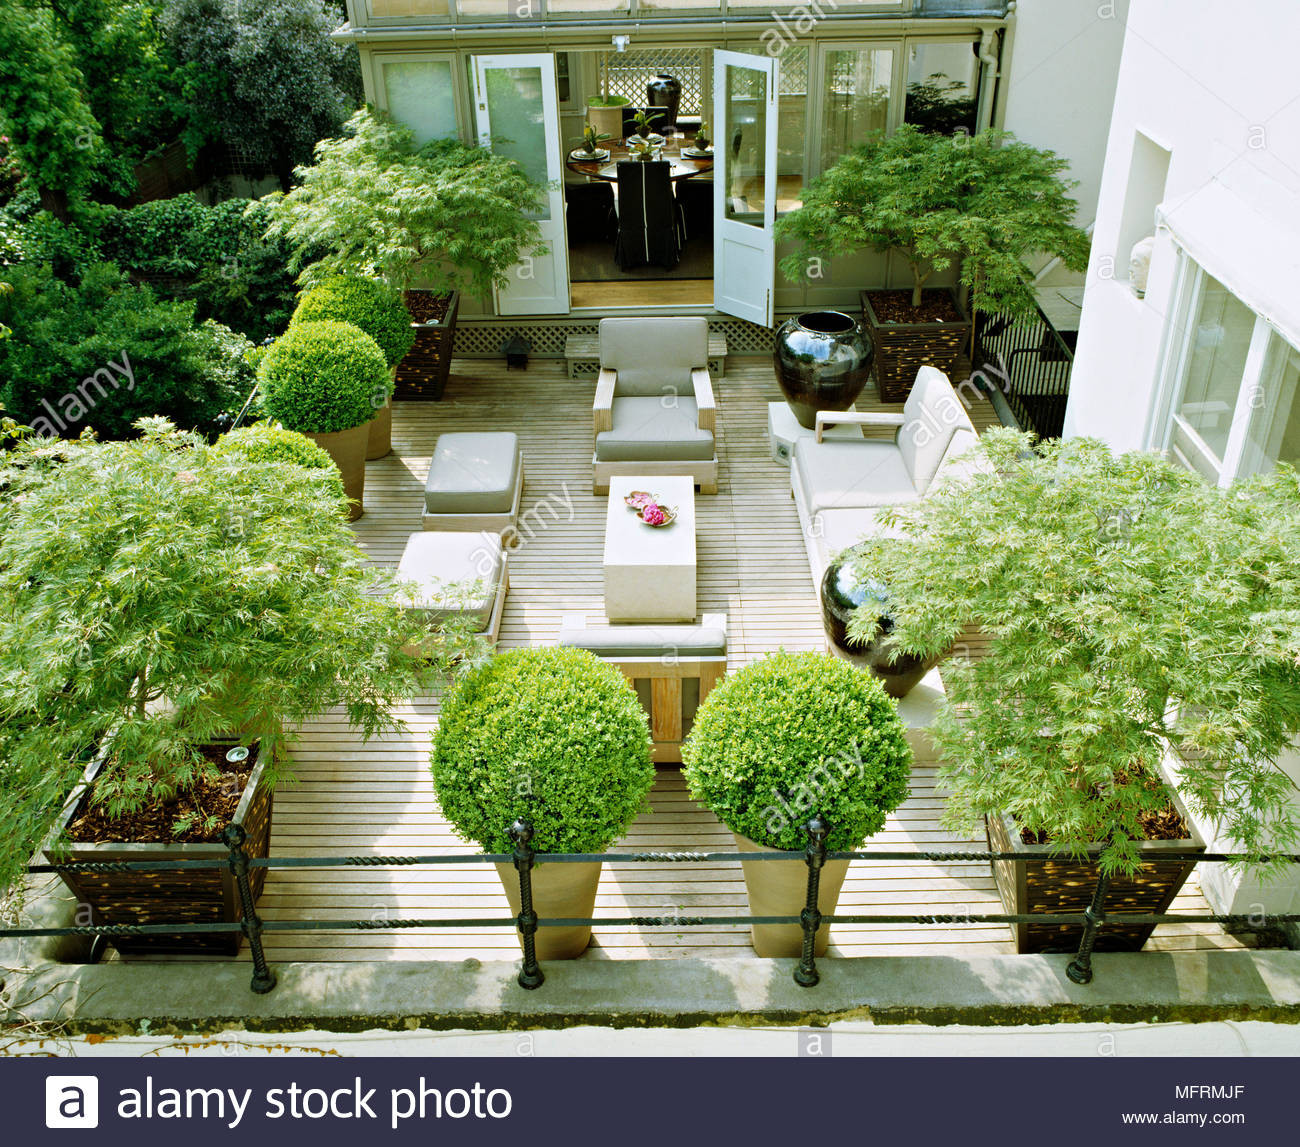 Terrace Landscape With Trees
 A modern town garden roof terrace with decked patio area